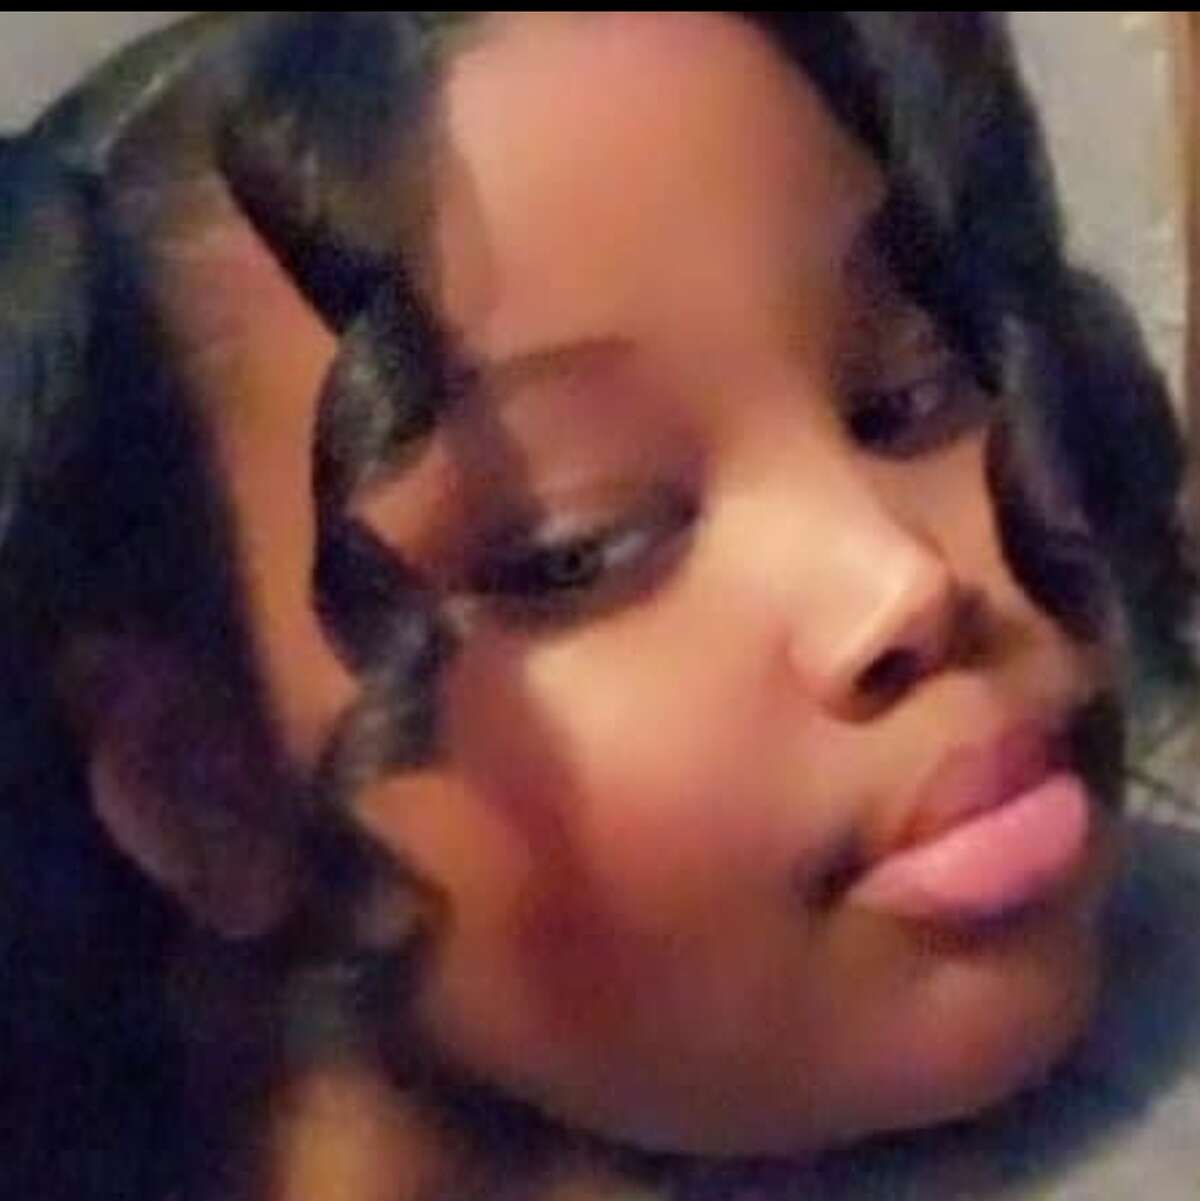 Na’Mylah Turner-Moore was killed at age 10 in Saginaw. A GoFundMe was created by Na'Mylah's uncle to help cover funeral costs. The fundraiser surpassed its goal of $5,000, raising more than $8,000.